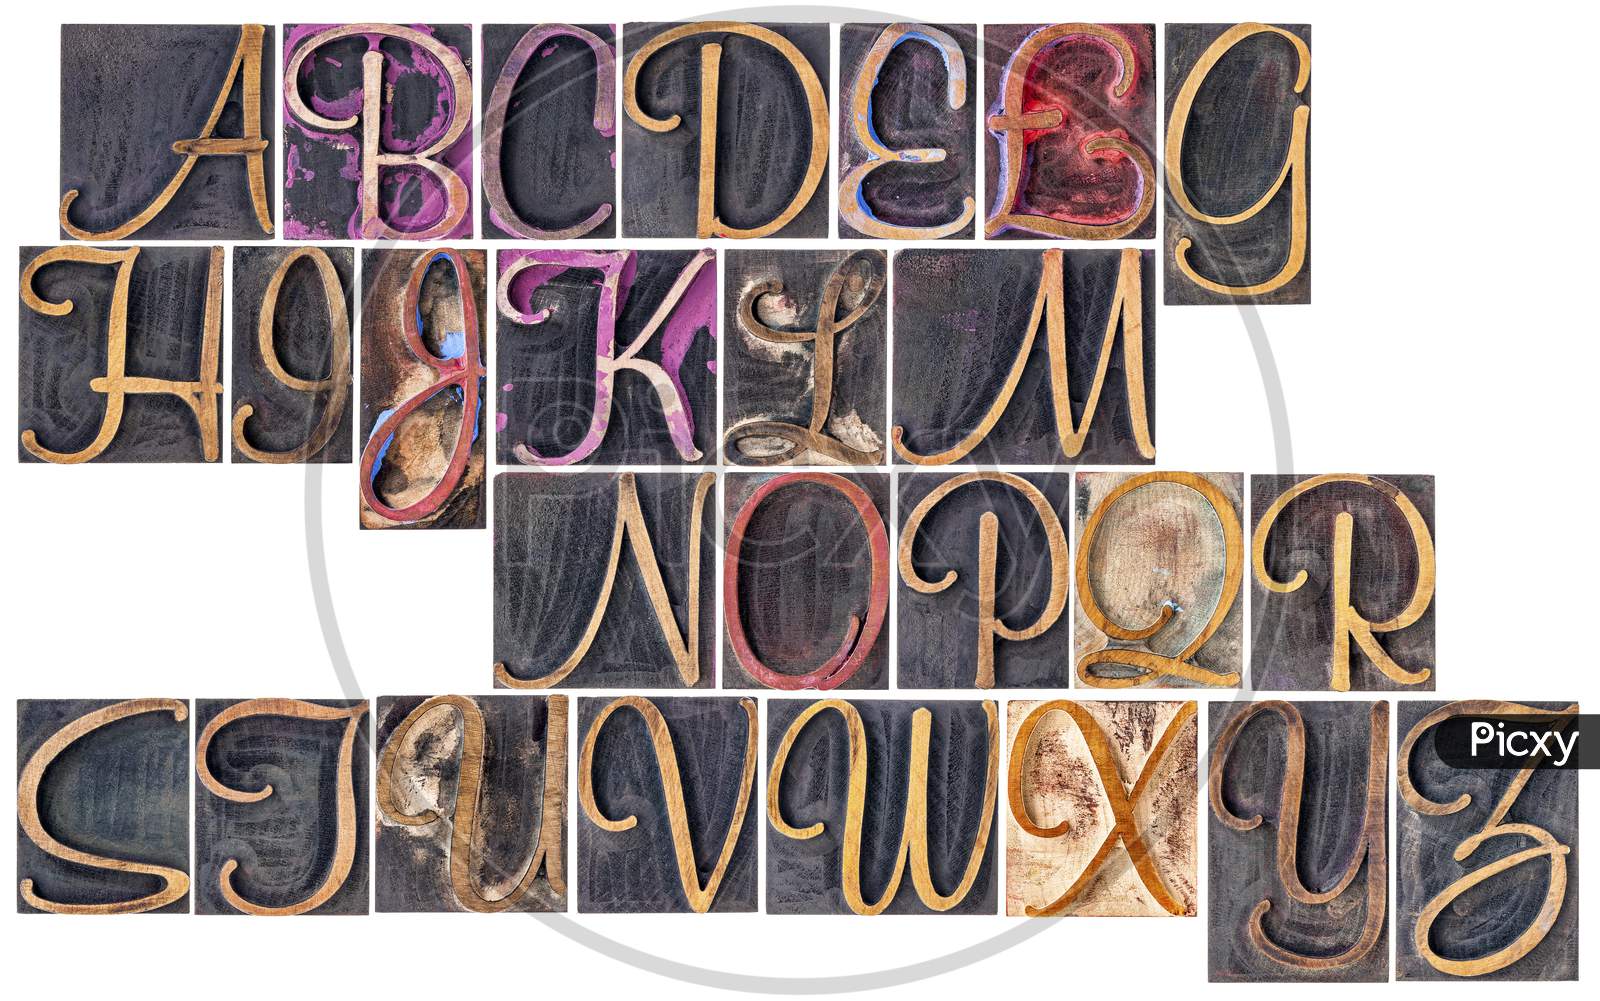 Complete English Alphabet  In Ornamental Script Wood Type - A  Collage Of 26 Isolated Letterpress Printing Blocks Stained By Color And Black Ink